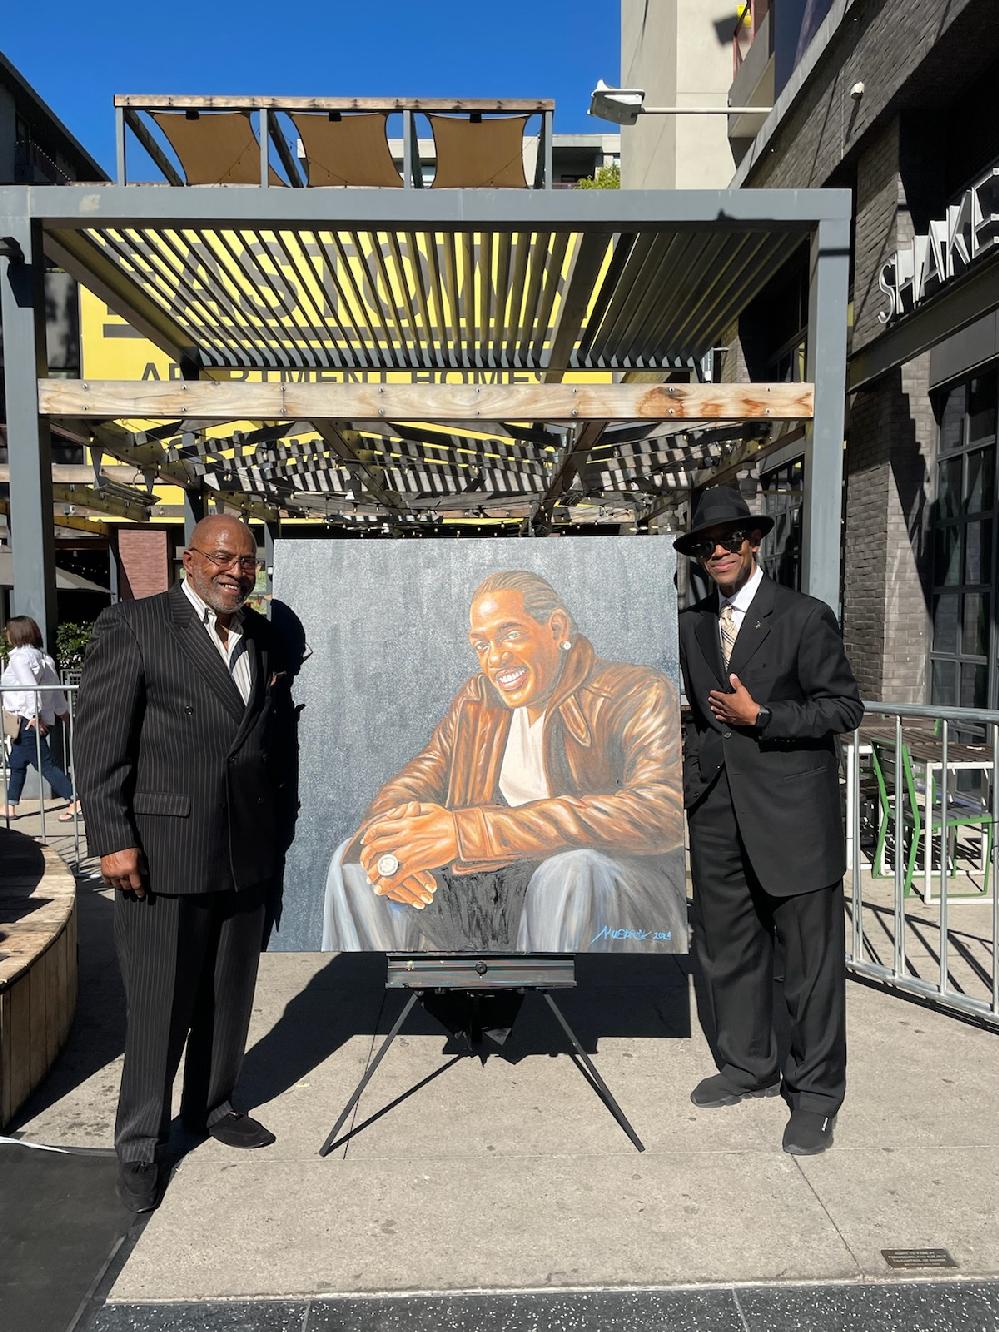 Artist and EURweb contributor Mohammad Mubarak (left) poses with Jimmy Jam Harris (right) at the Charlie Wilson star ceremony with his portrait of Wilson. 